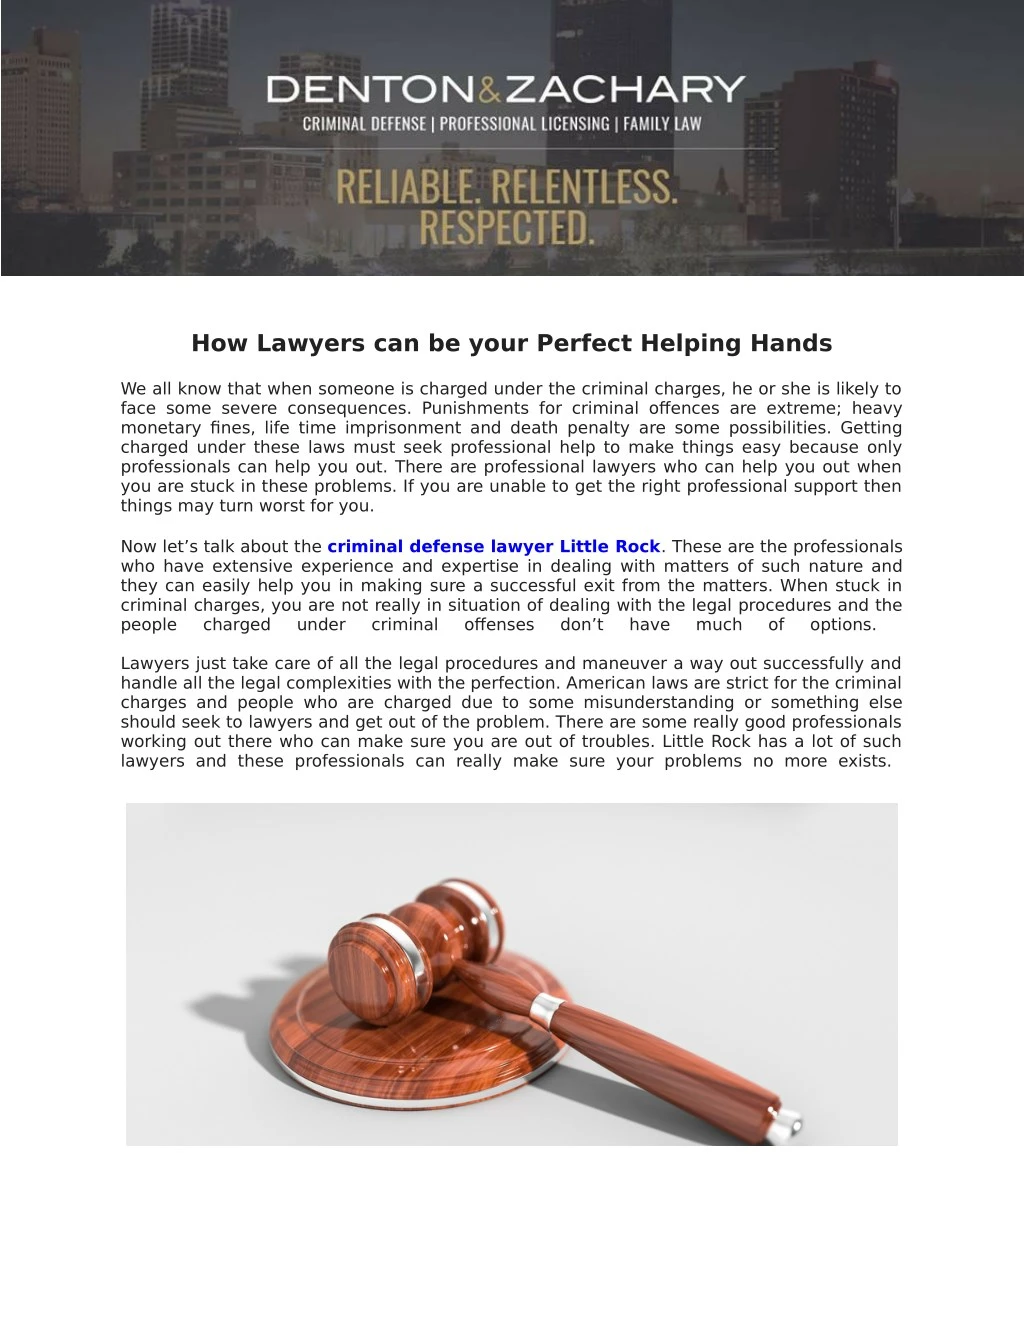 how lawyers can be your perfect helping hands